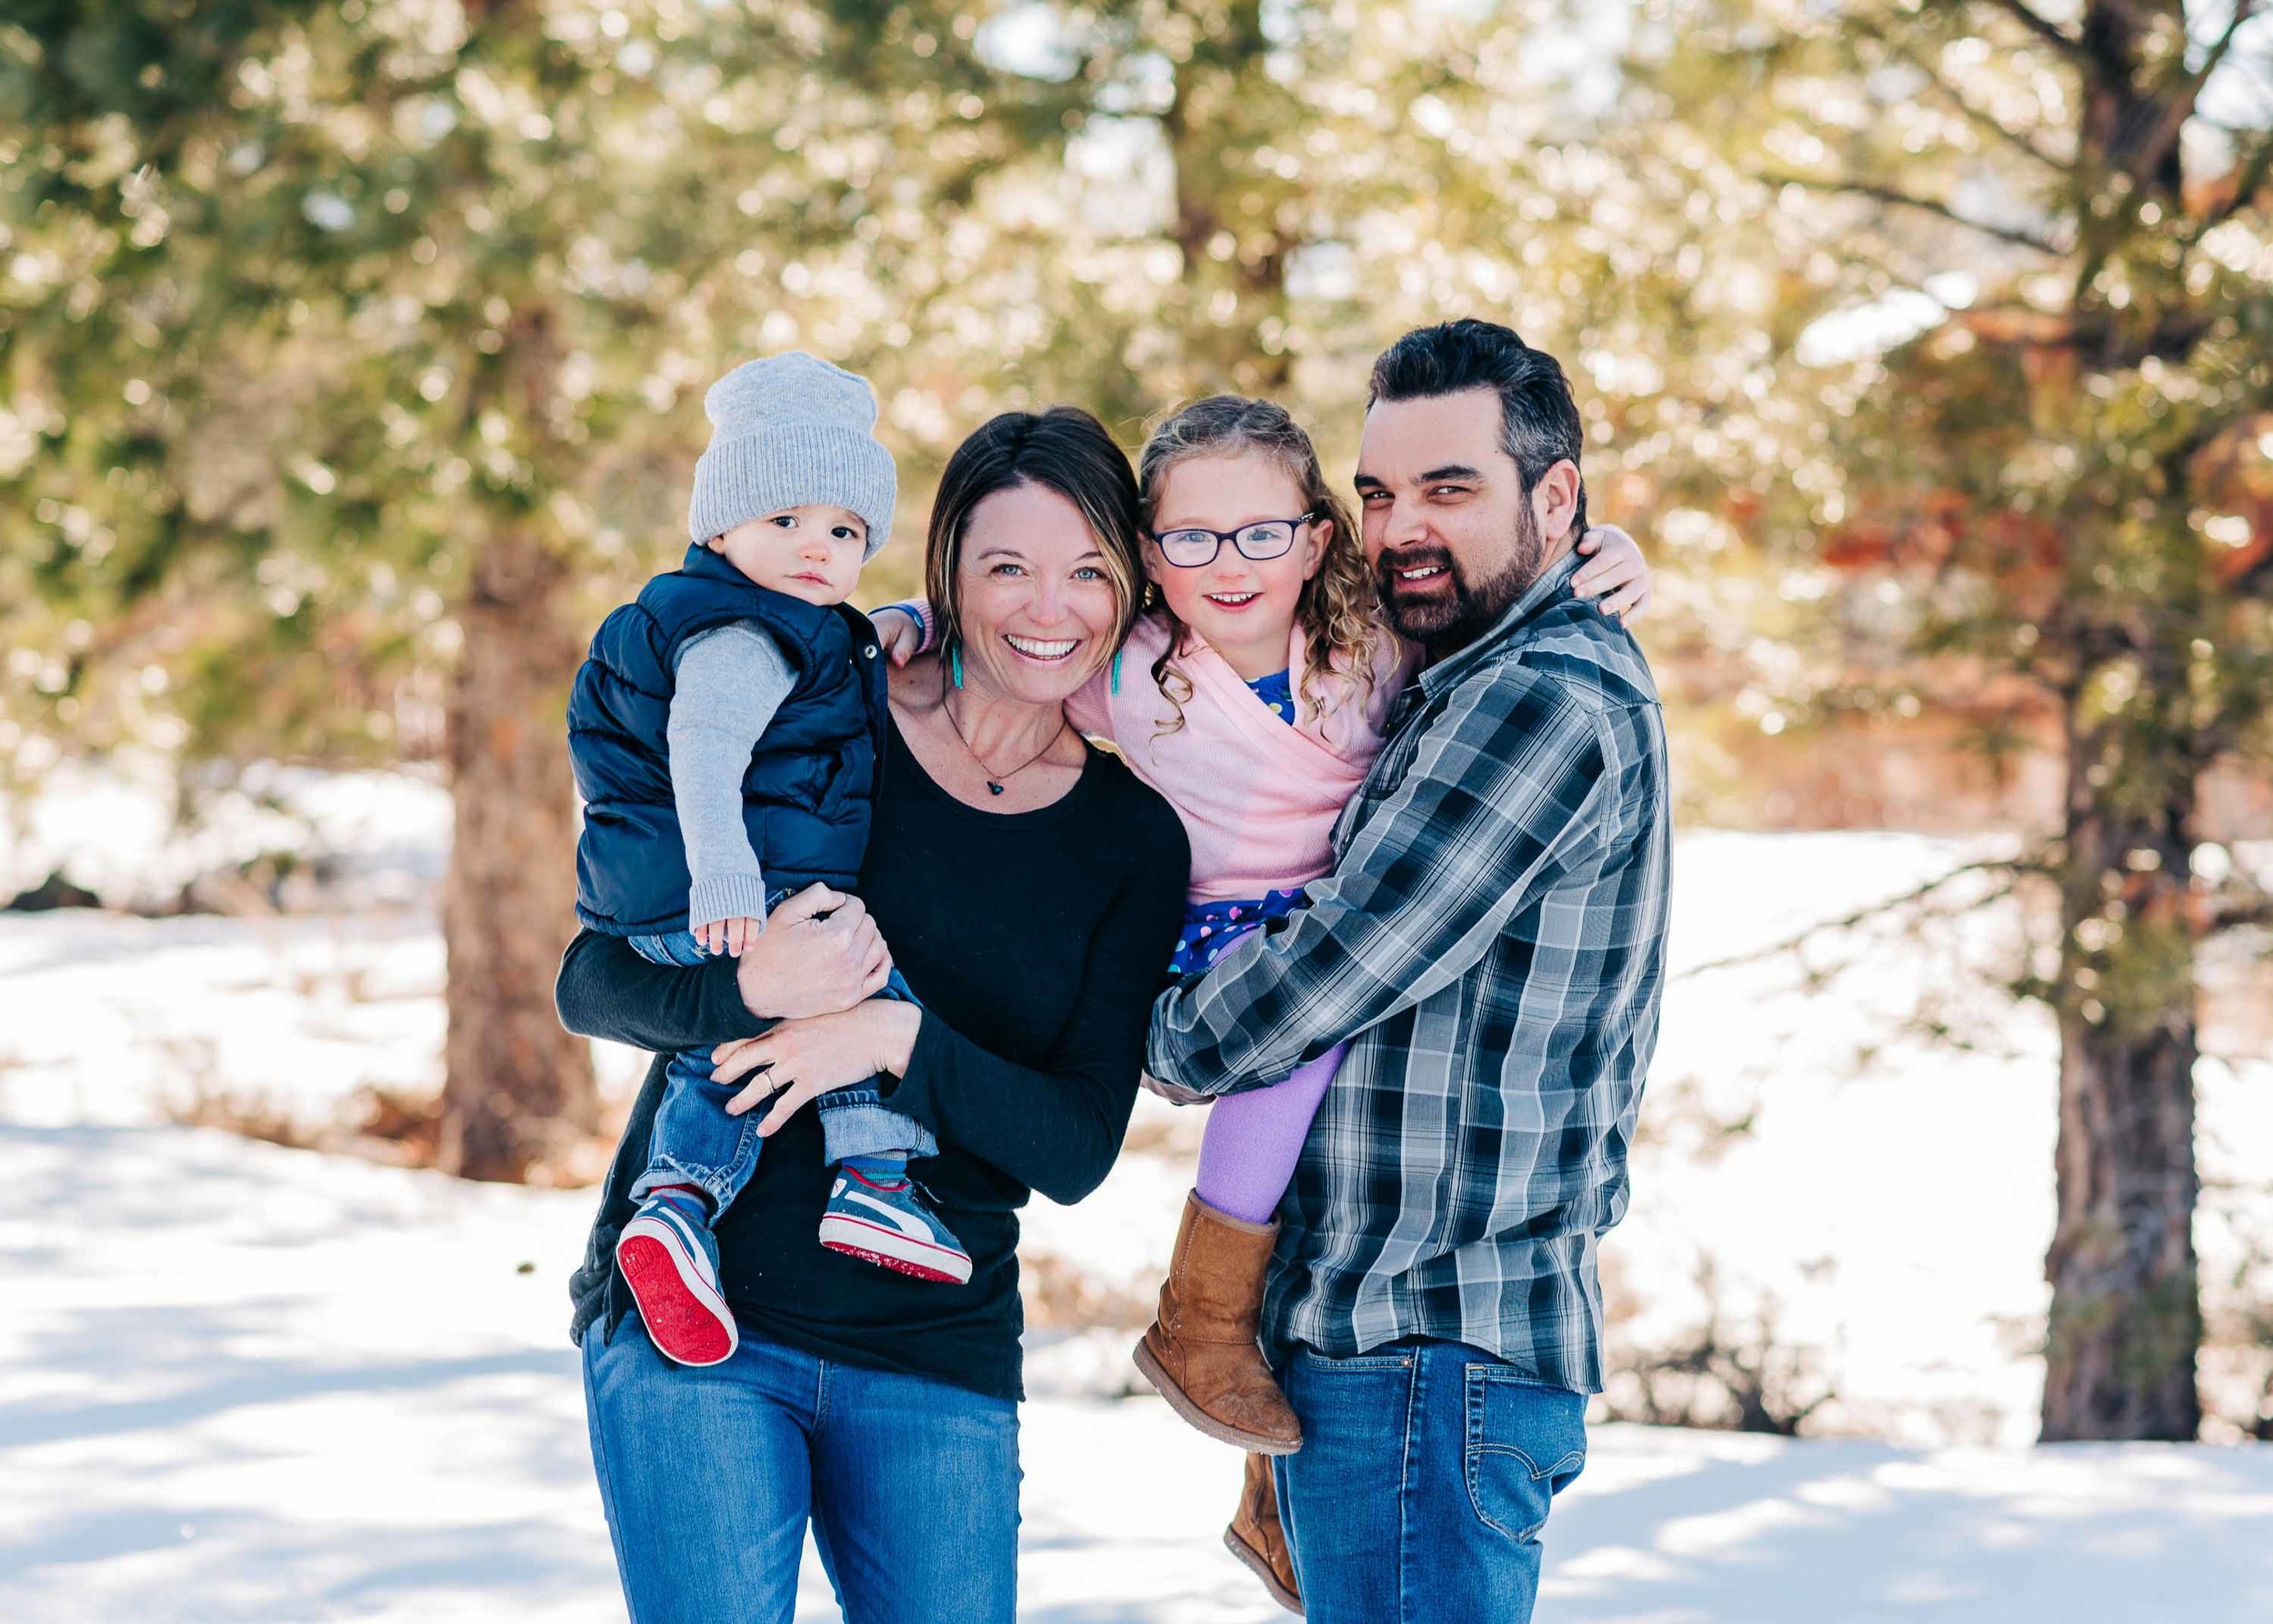 Snowy Family Sessions | Lifestyle Photographer in the Reno/Tahoe Area ...